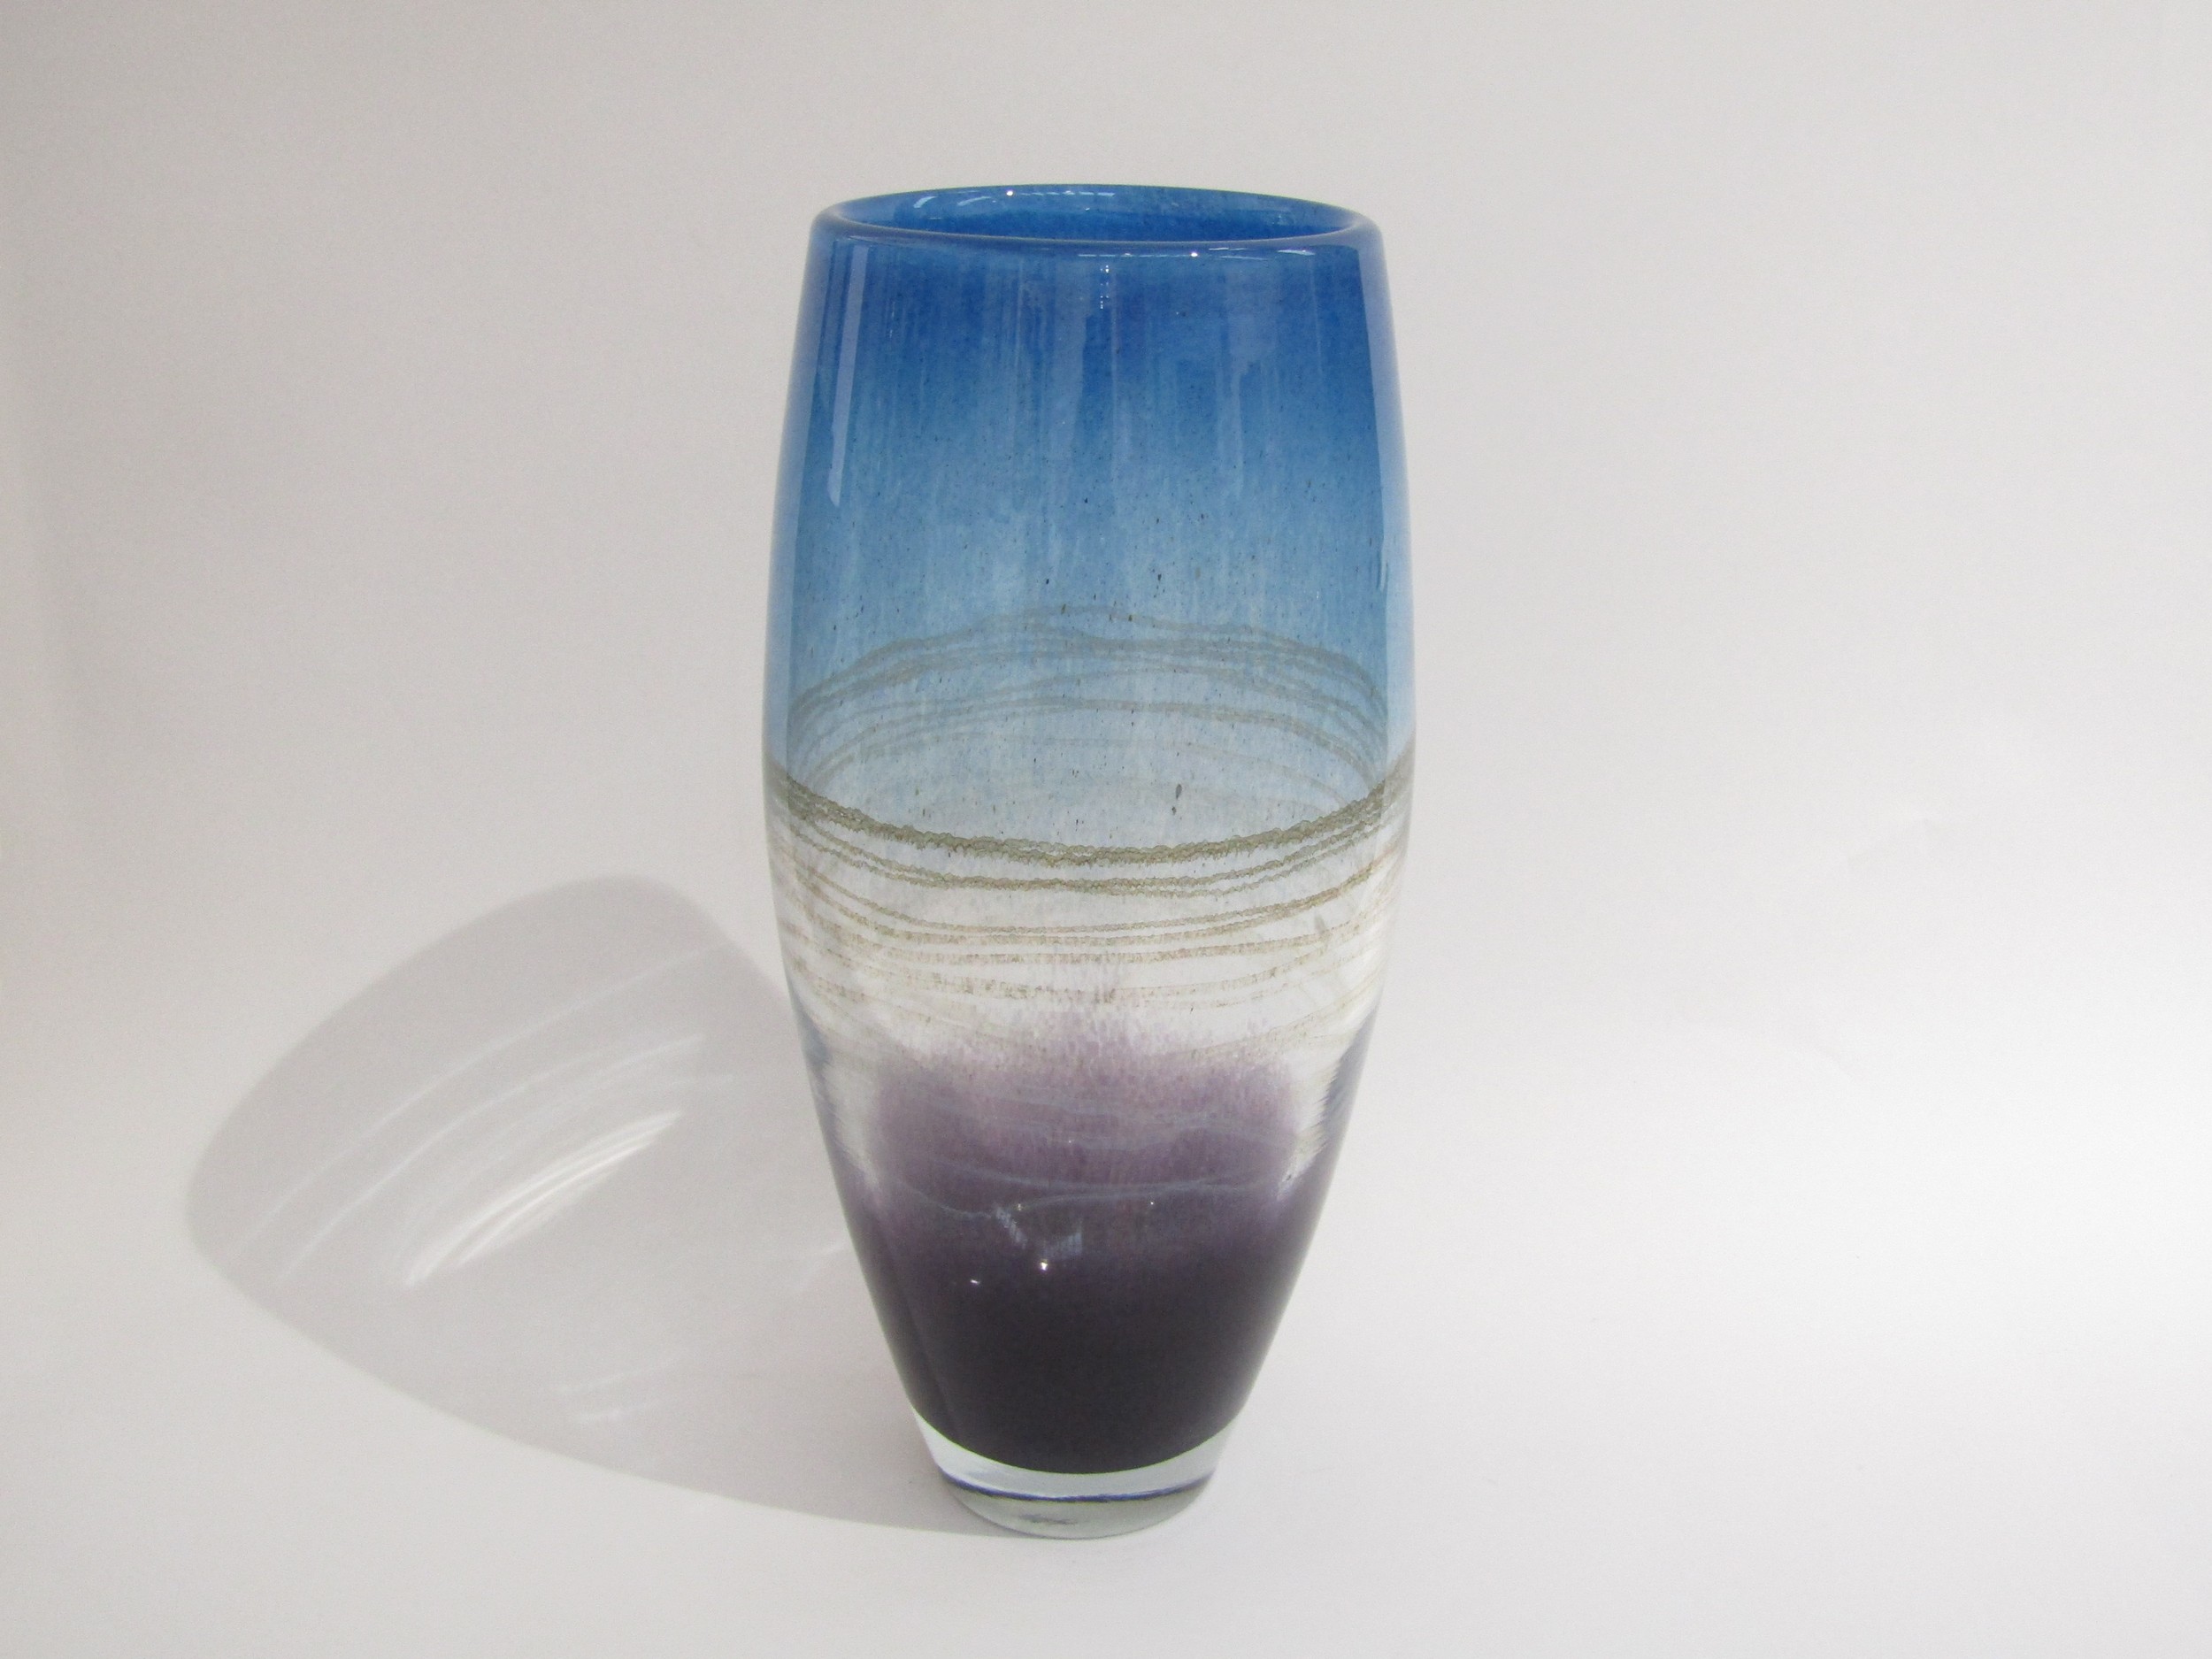 A large studio art glass vase by Lithuanian master glass blower Algimantas Zilys (1939-2009)